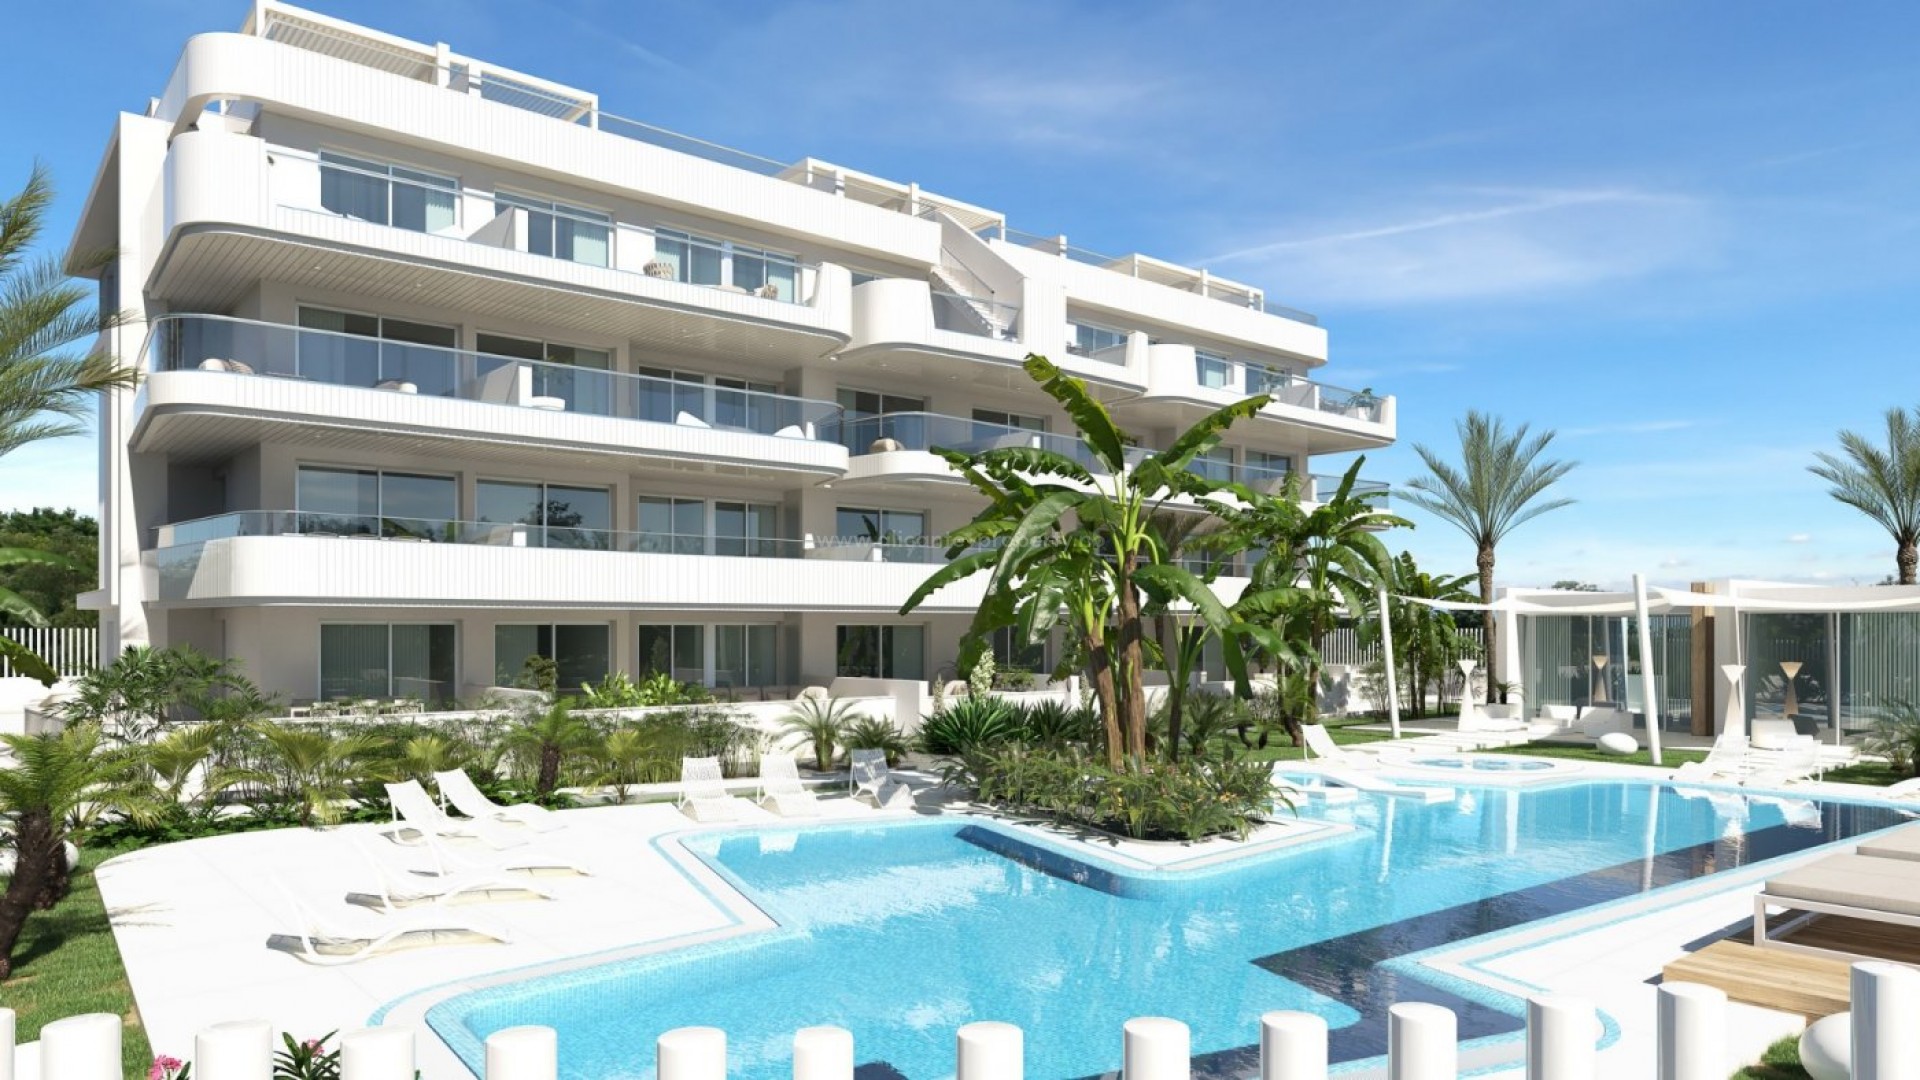 Luxury homes in Lomas de Cabo Roig, apartments and penthouses, 2/3 bedrooms and 2 bathrooms, common areas, garden and play area around, large swimming pool